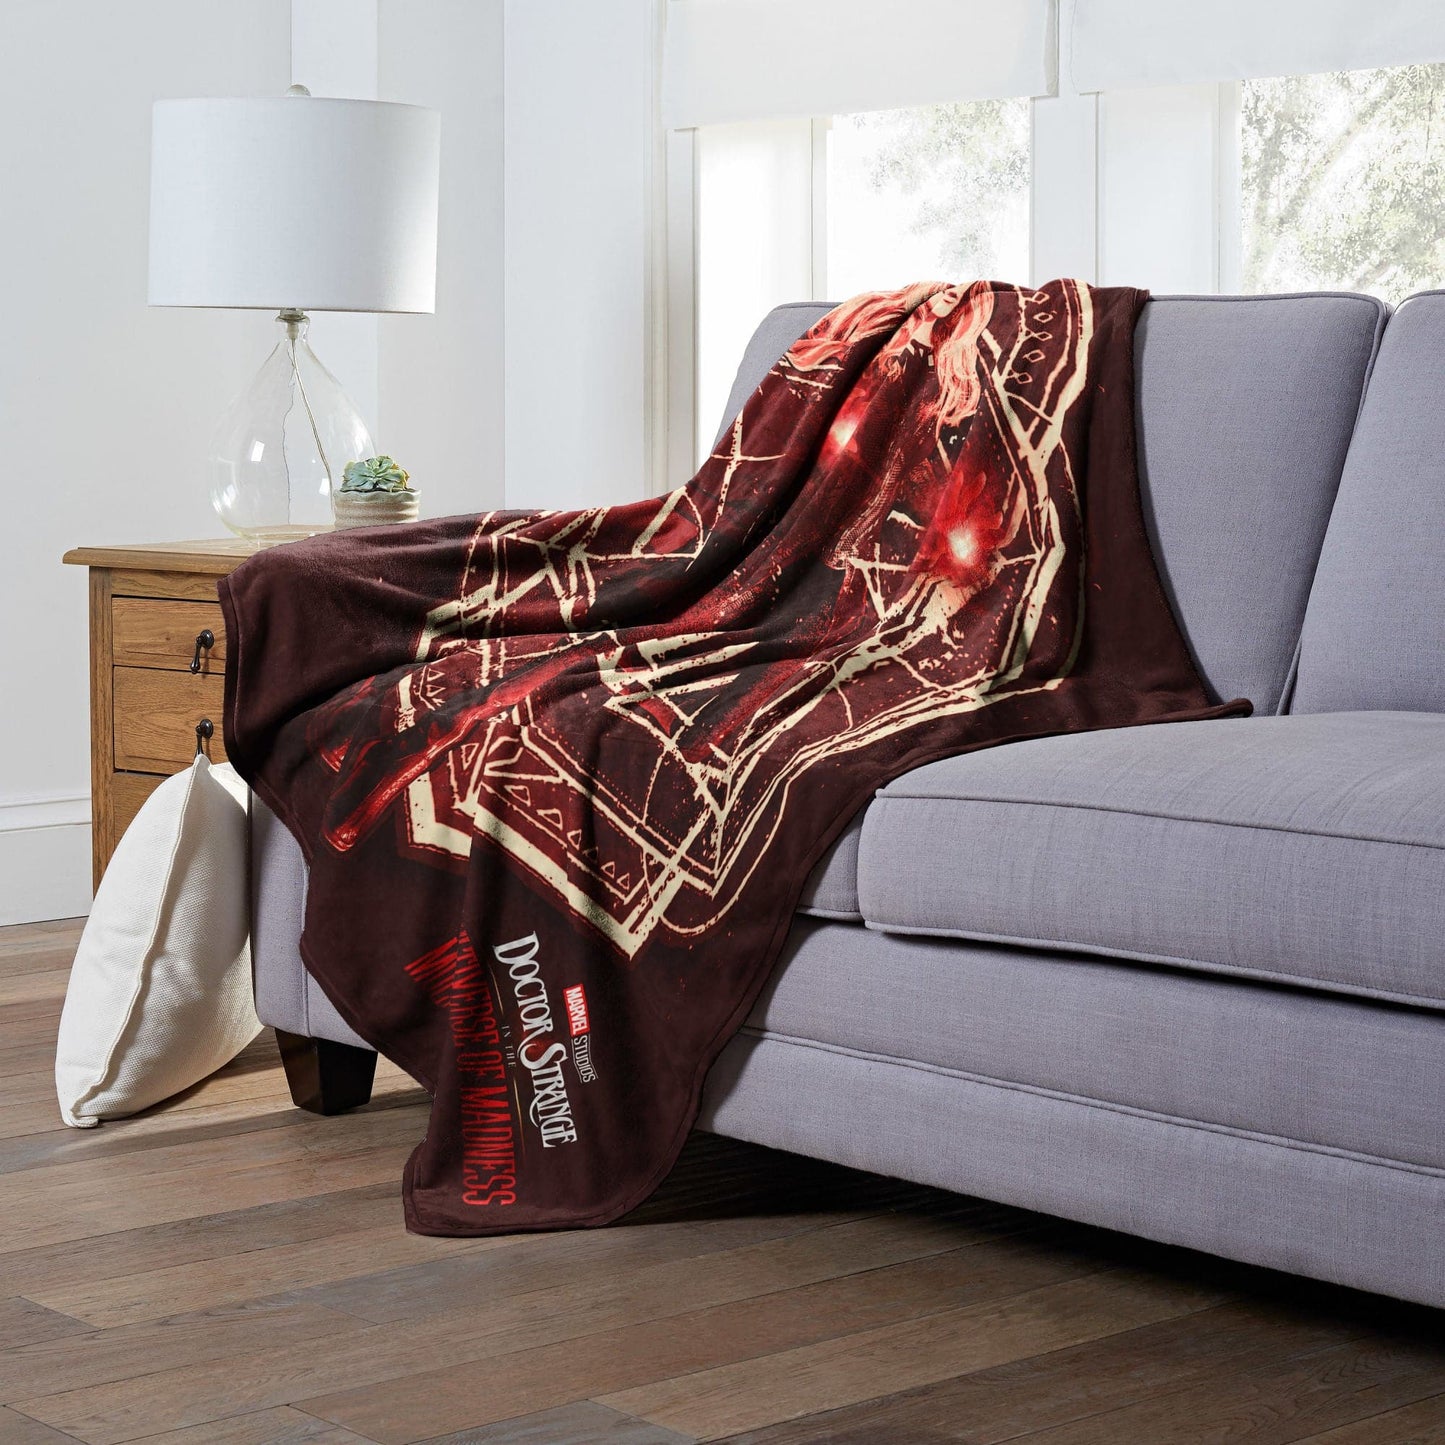 Marvel's Dr. Strange in the Multiverse of Madness Silk Touch Throw Blanket, 50" x 60", Red Scarlett